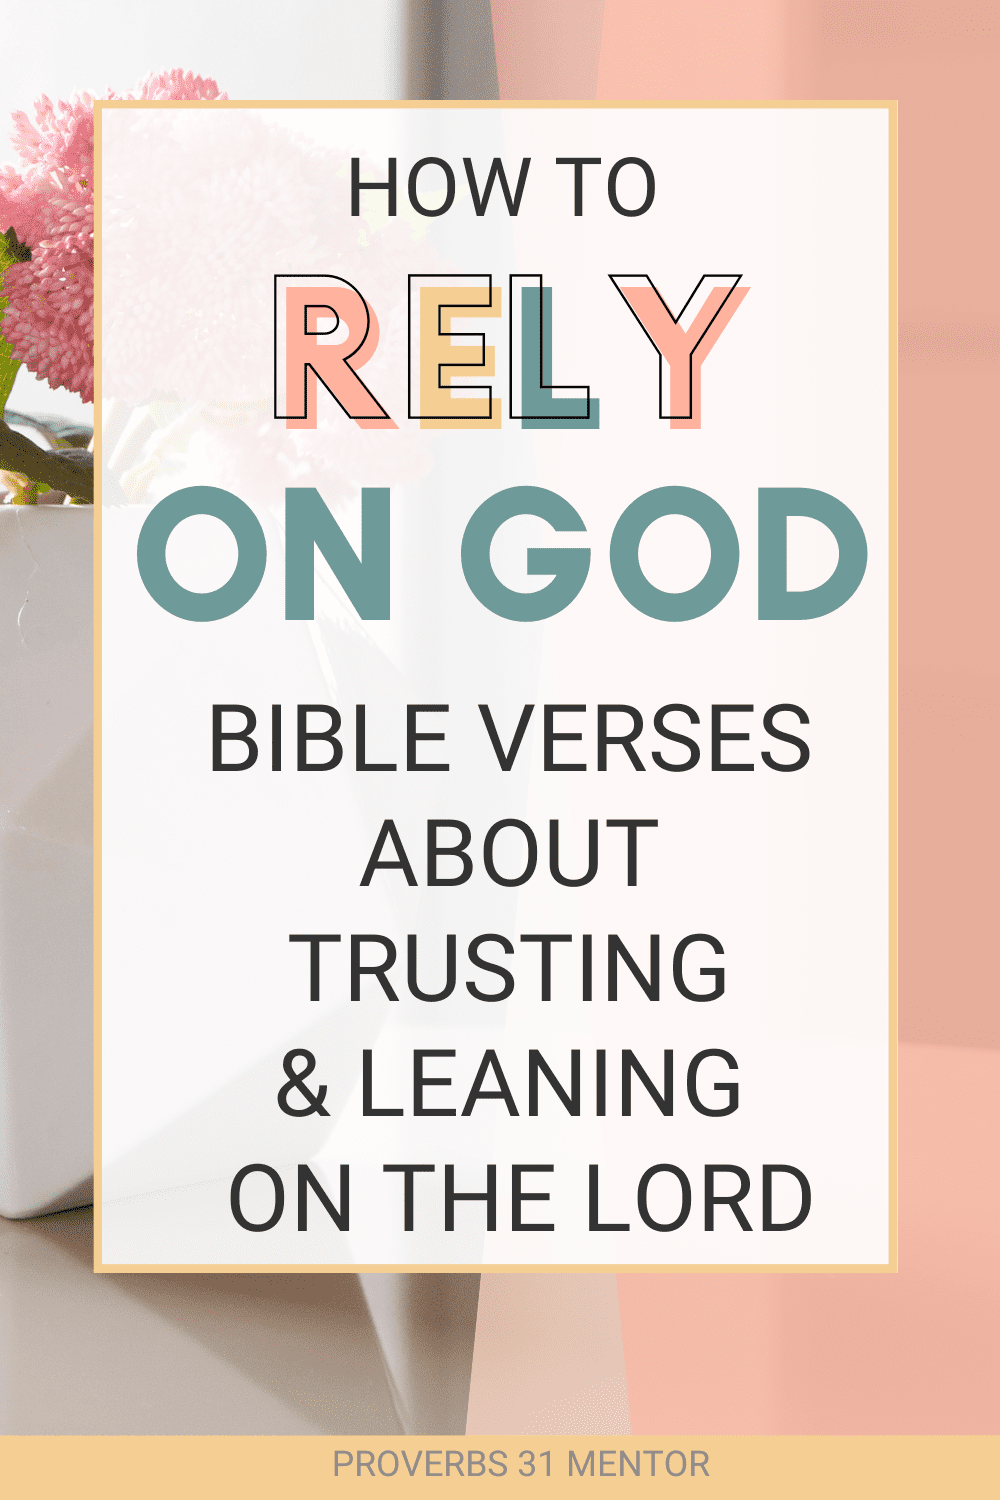 Title- Rely on God: Bible Verses About Trusting and Learning on Him